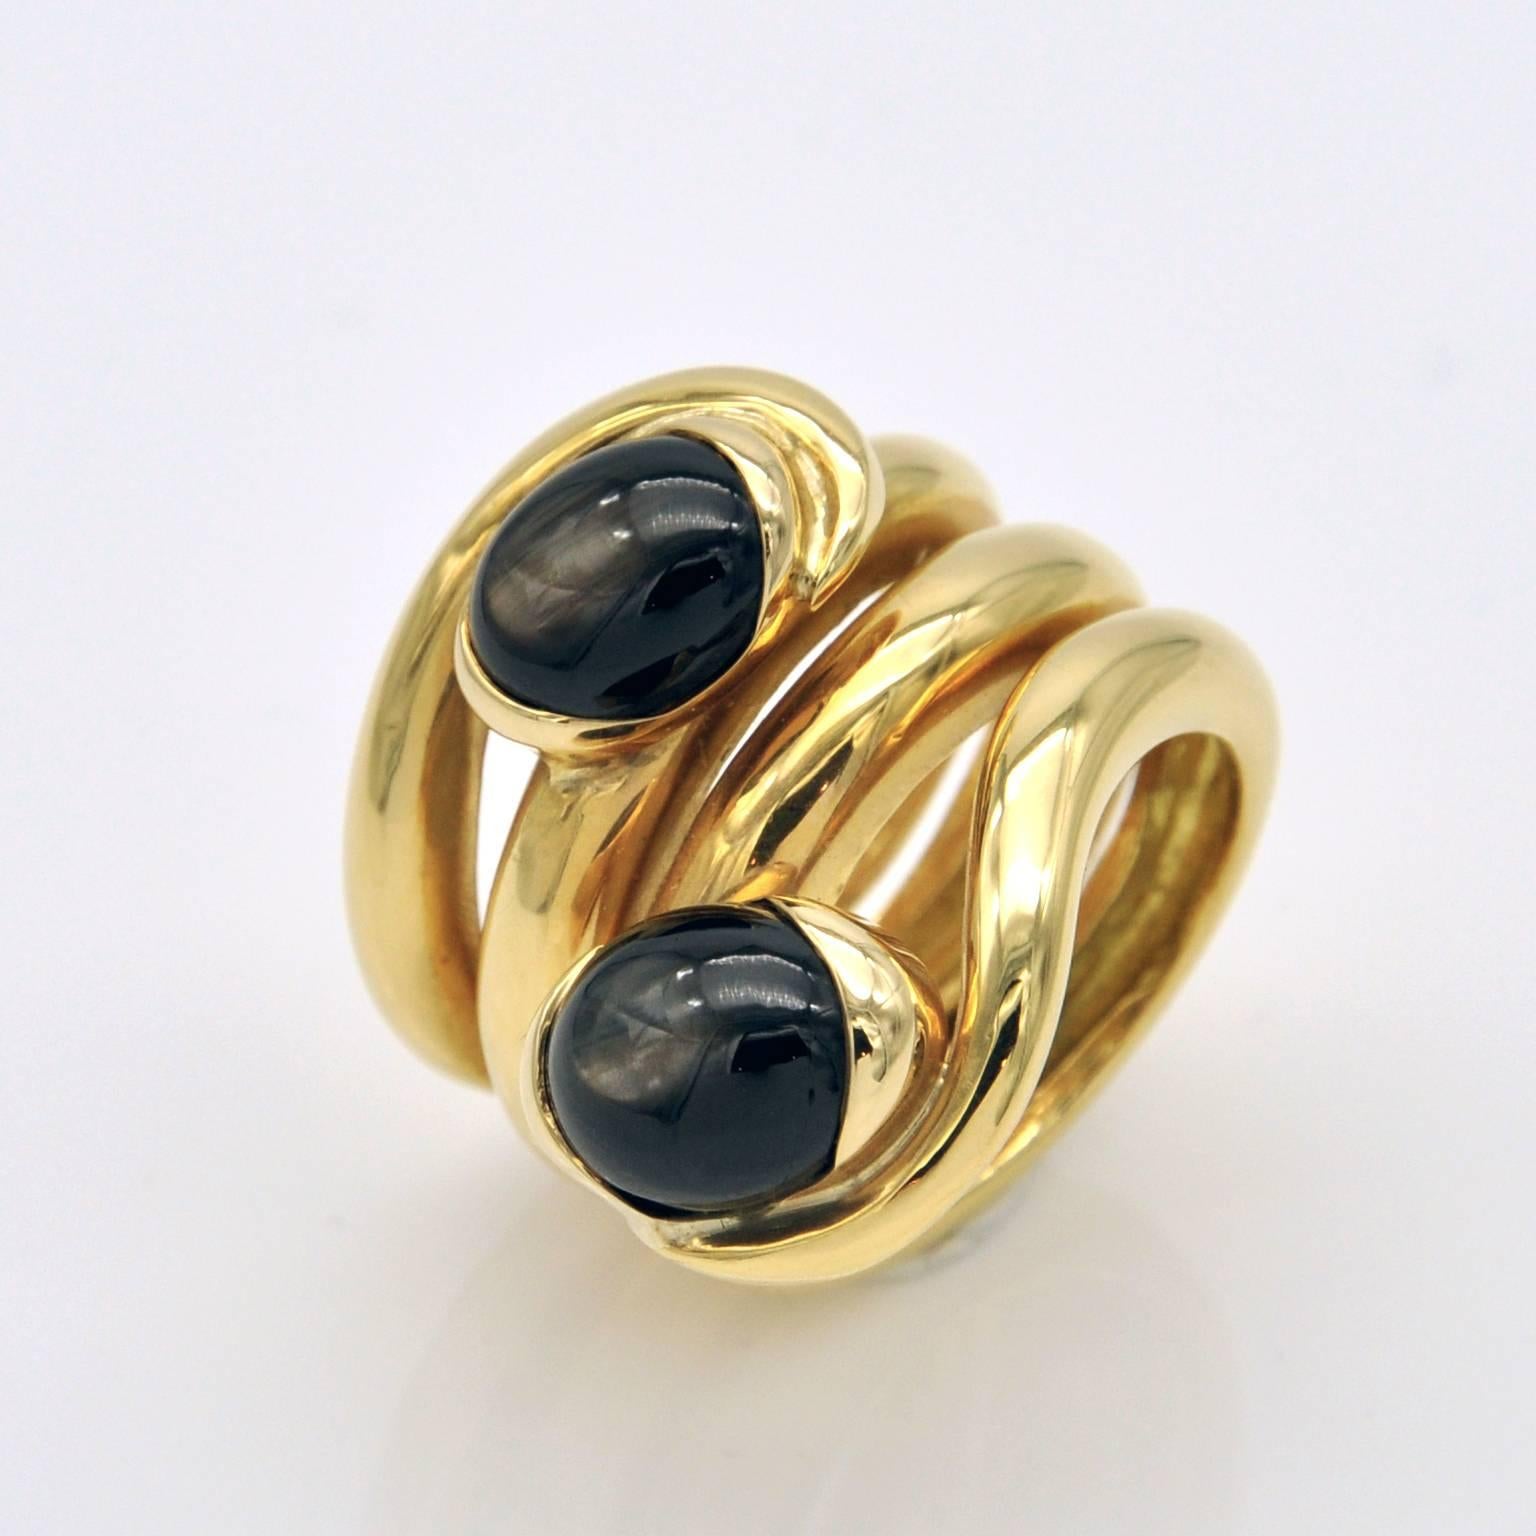 This Hand made ring is like stem that delicately wraps around the finger holding two oval black star sapphires.

Ring Details: 
Black Star Sapphires 7,85 carats .
French Hallmark

Ring Size: 6 ¼ (US), 52.5 (European). Resizing if possible is